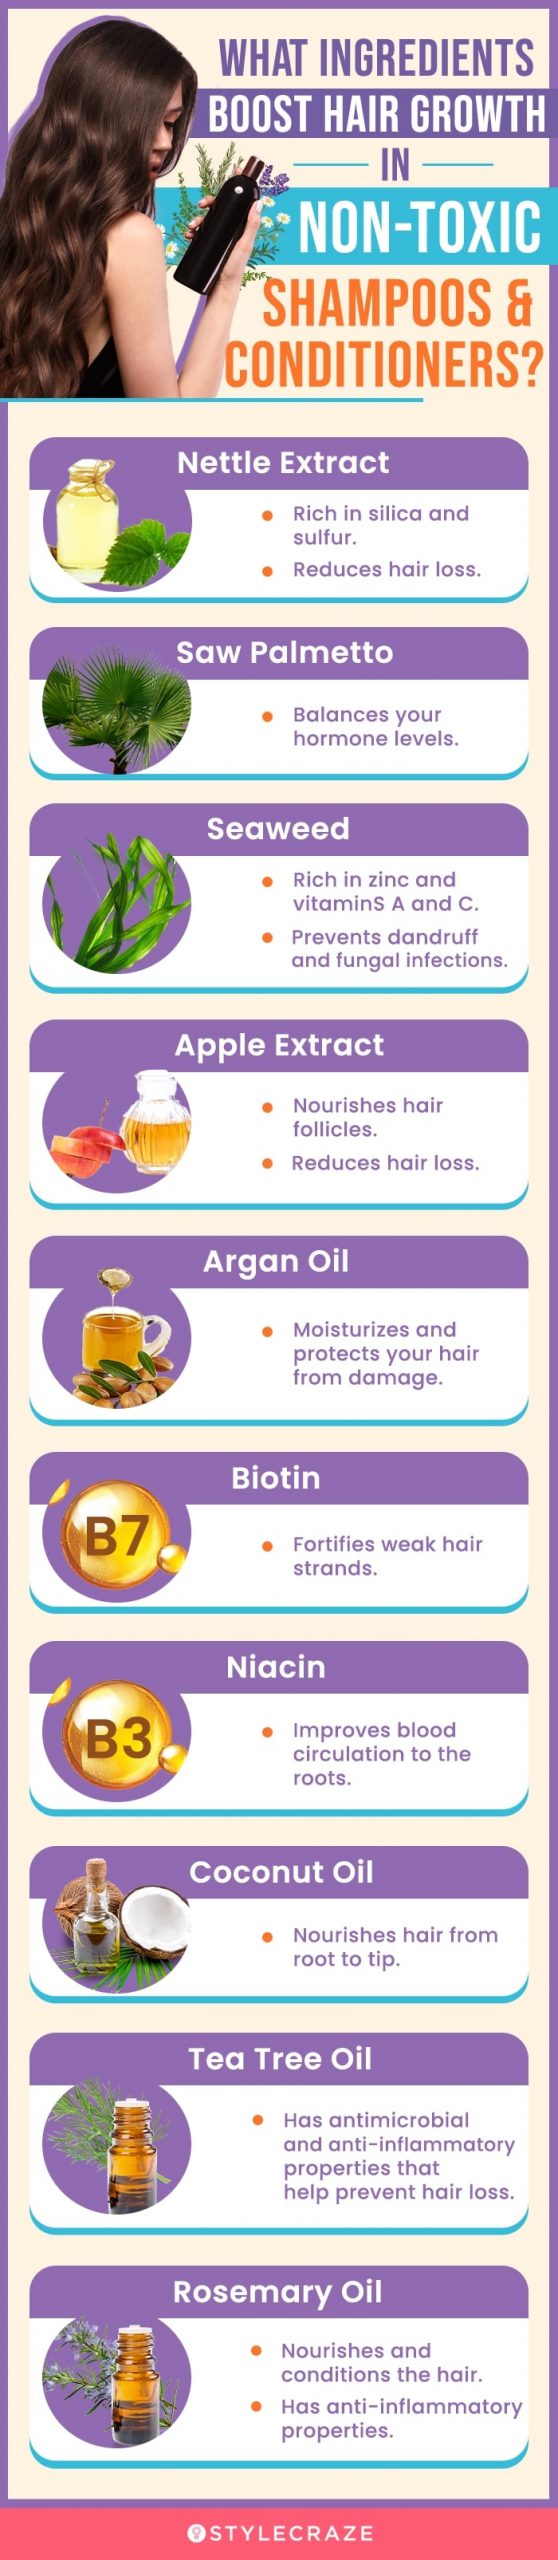 What Ingredients Boost Hair Growth In Non-Toxic Shampoo And Conditioners? (infographic)